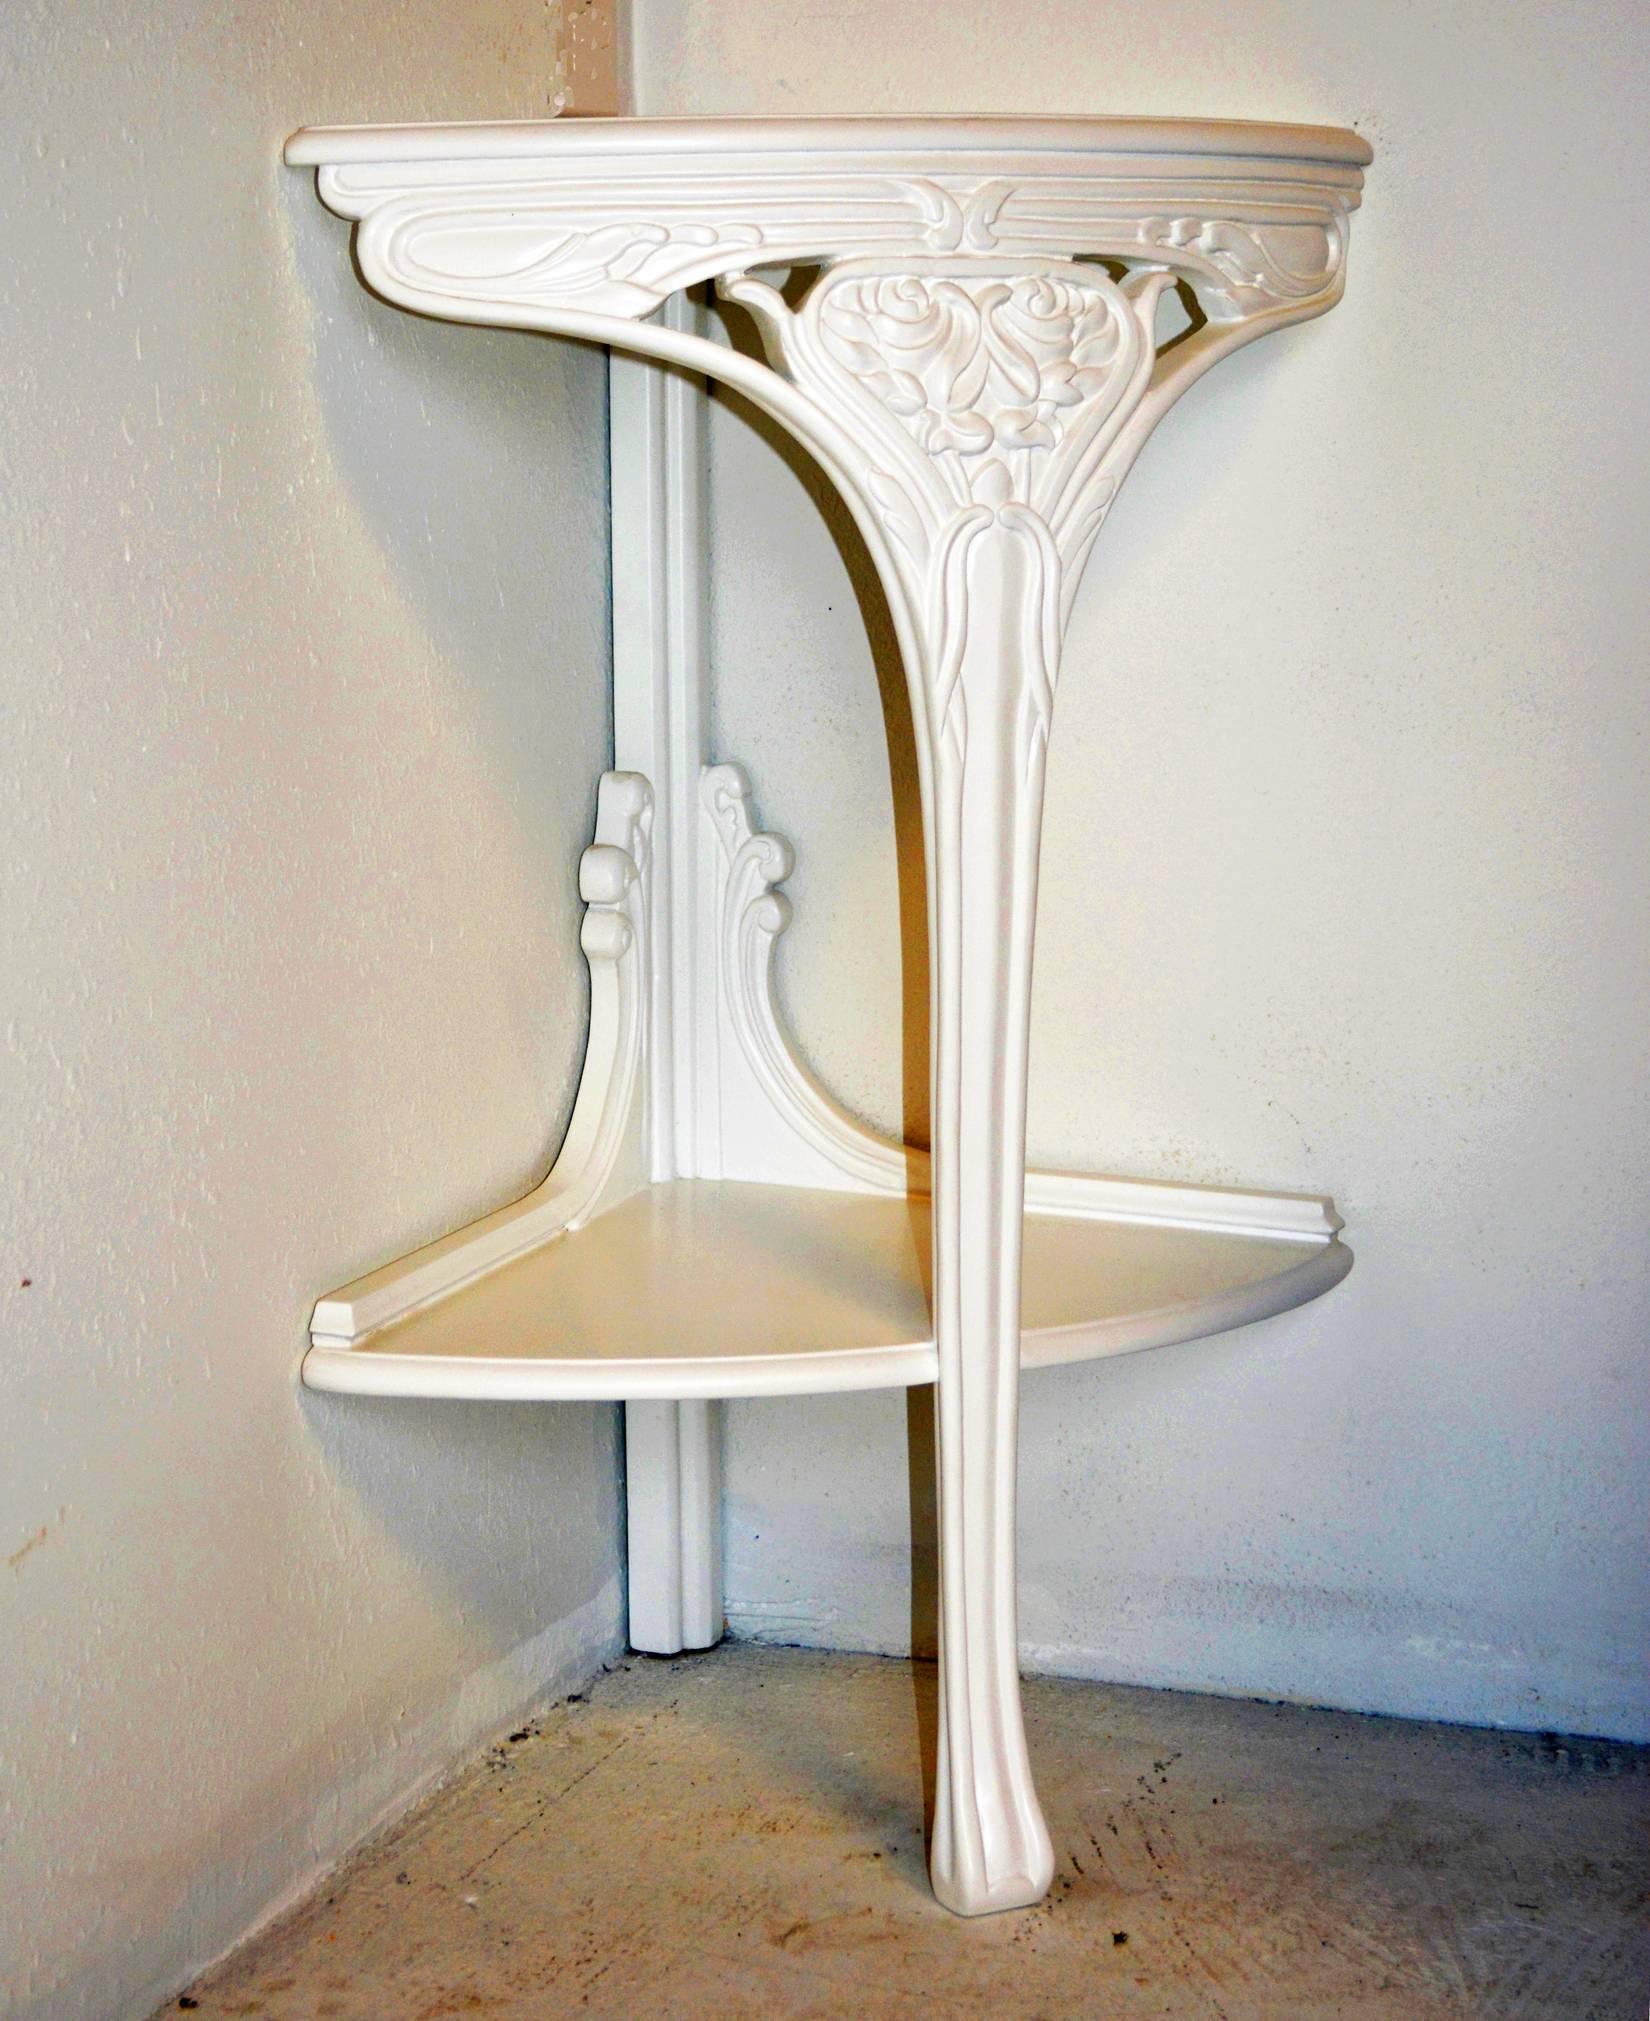 A chic pair of Art Nouveau carved encoignure (corner tables) lacquered ivory. Central splayed foot leg, supporting a lower shelf, rises to a carved apron.